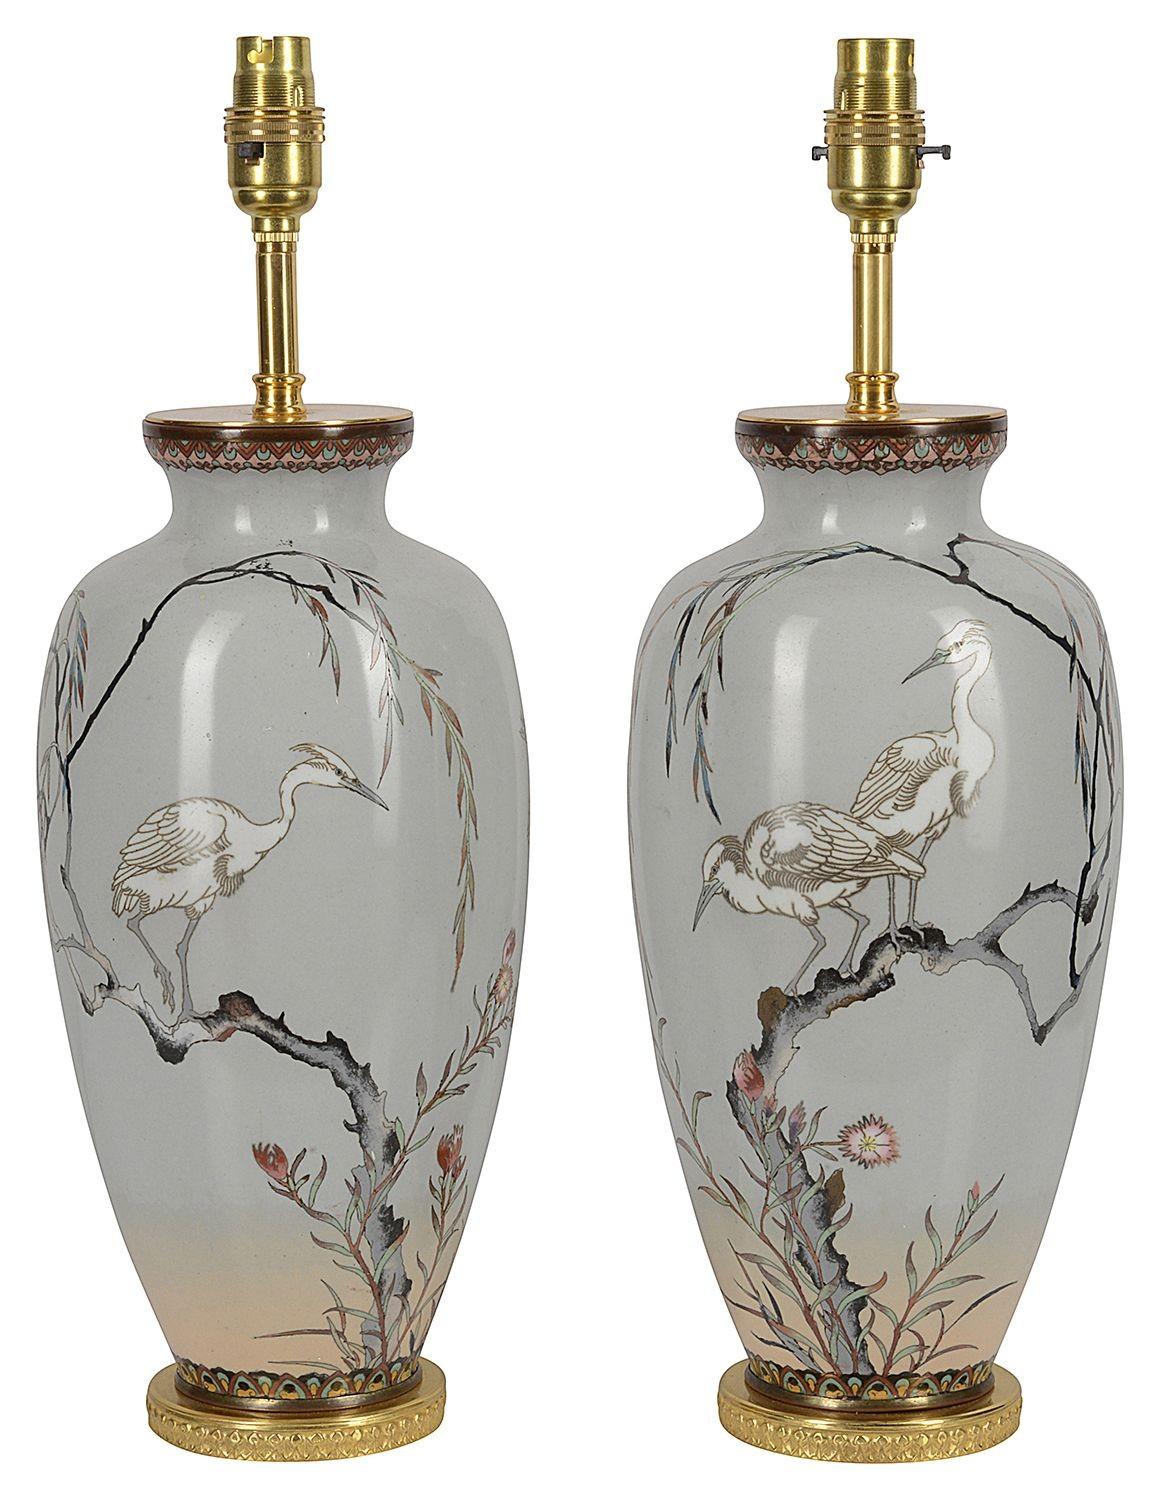 A fine quality pair of Japanese Meiji period (1868-1912) Cloisonné enamel vases, each having a Grey colour ground with wonderful Herons perched on trees with flowers and foliage around them, boarders to the top and bottom of classical motif